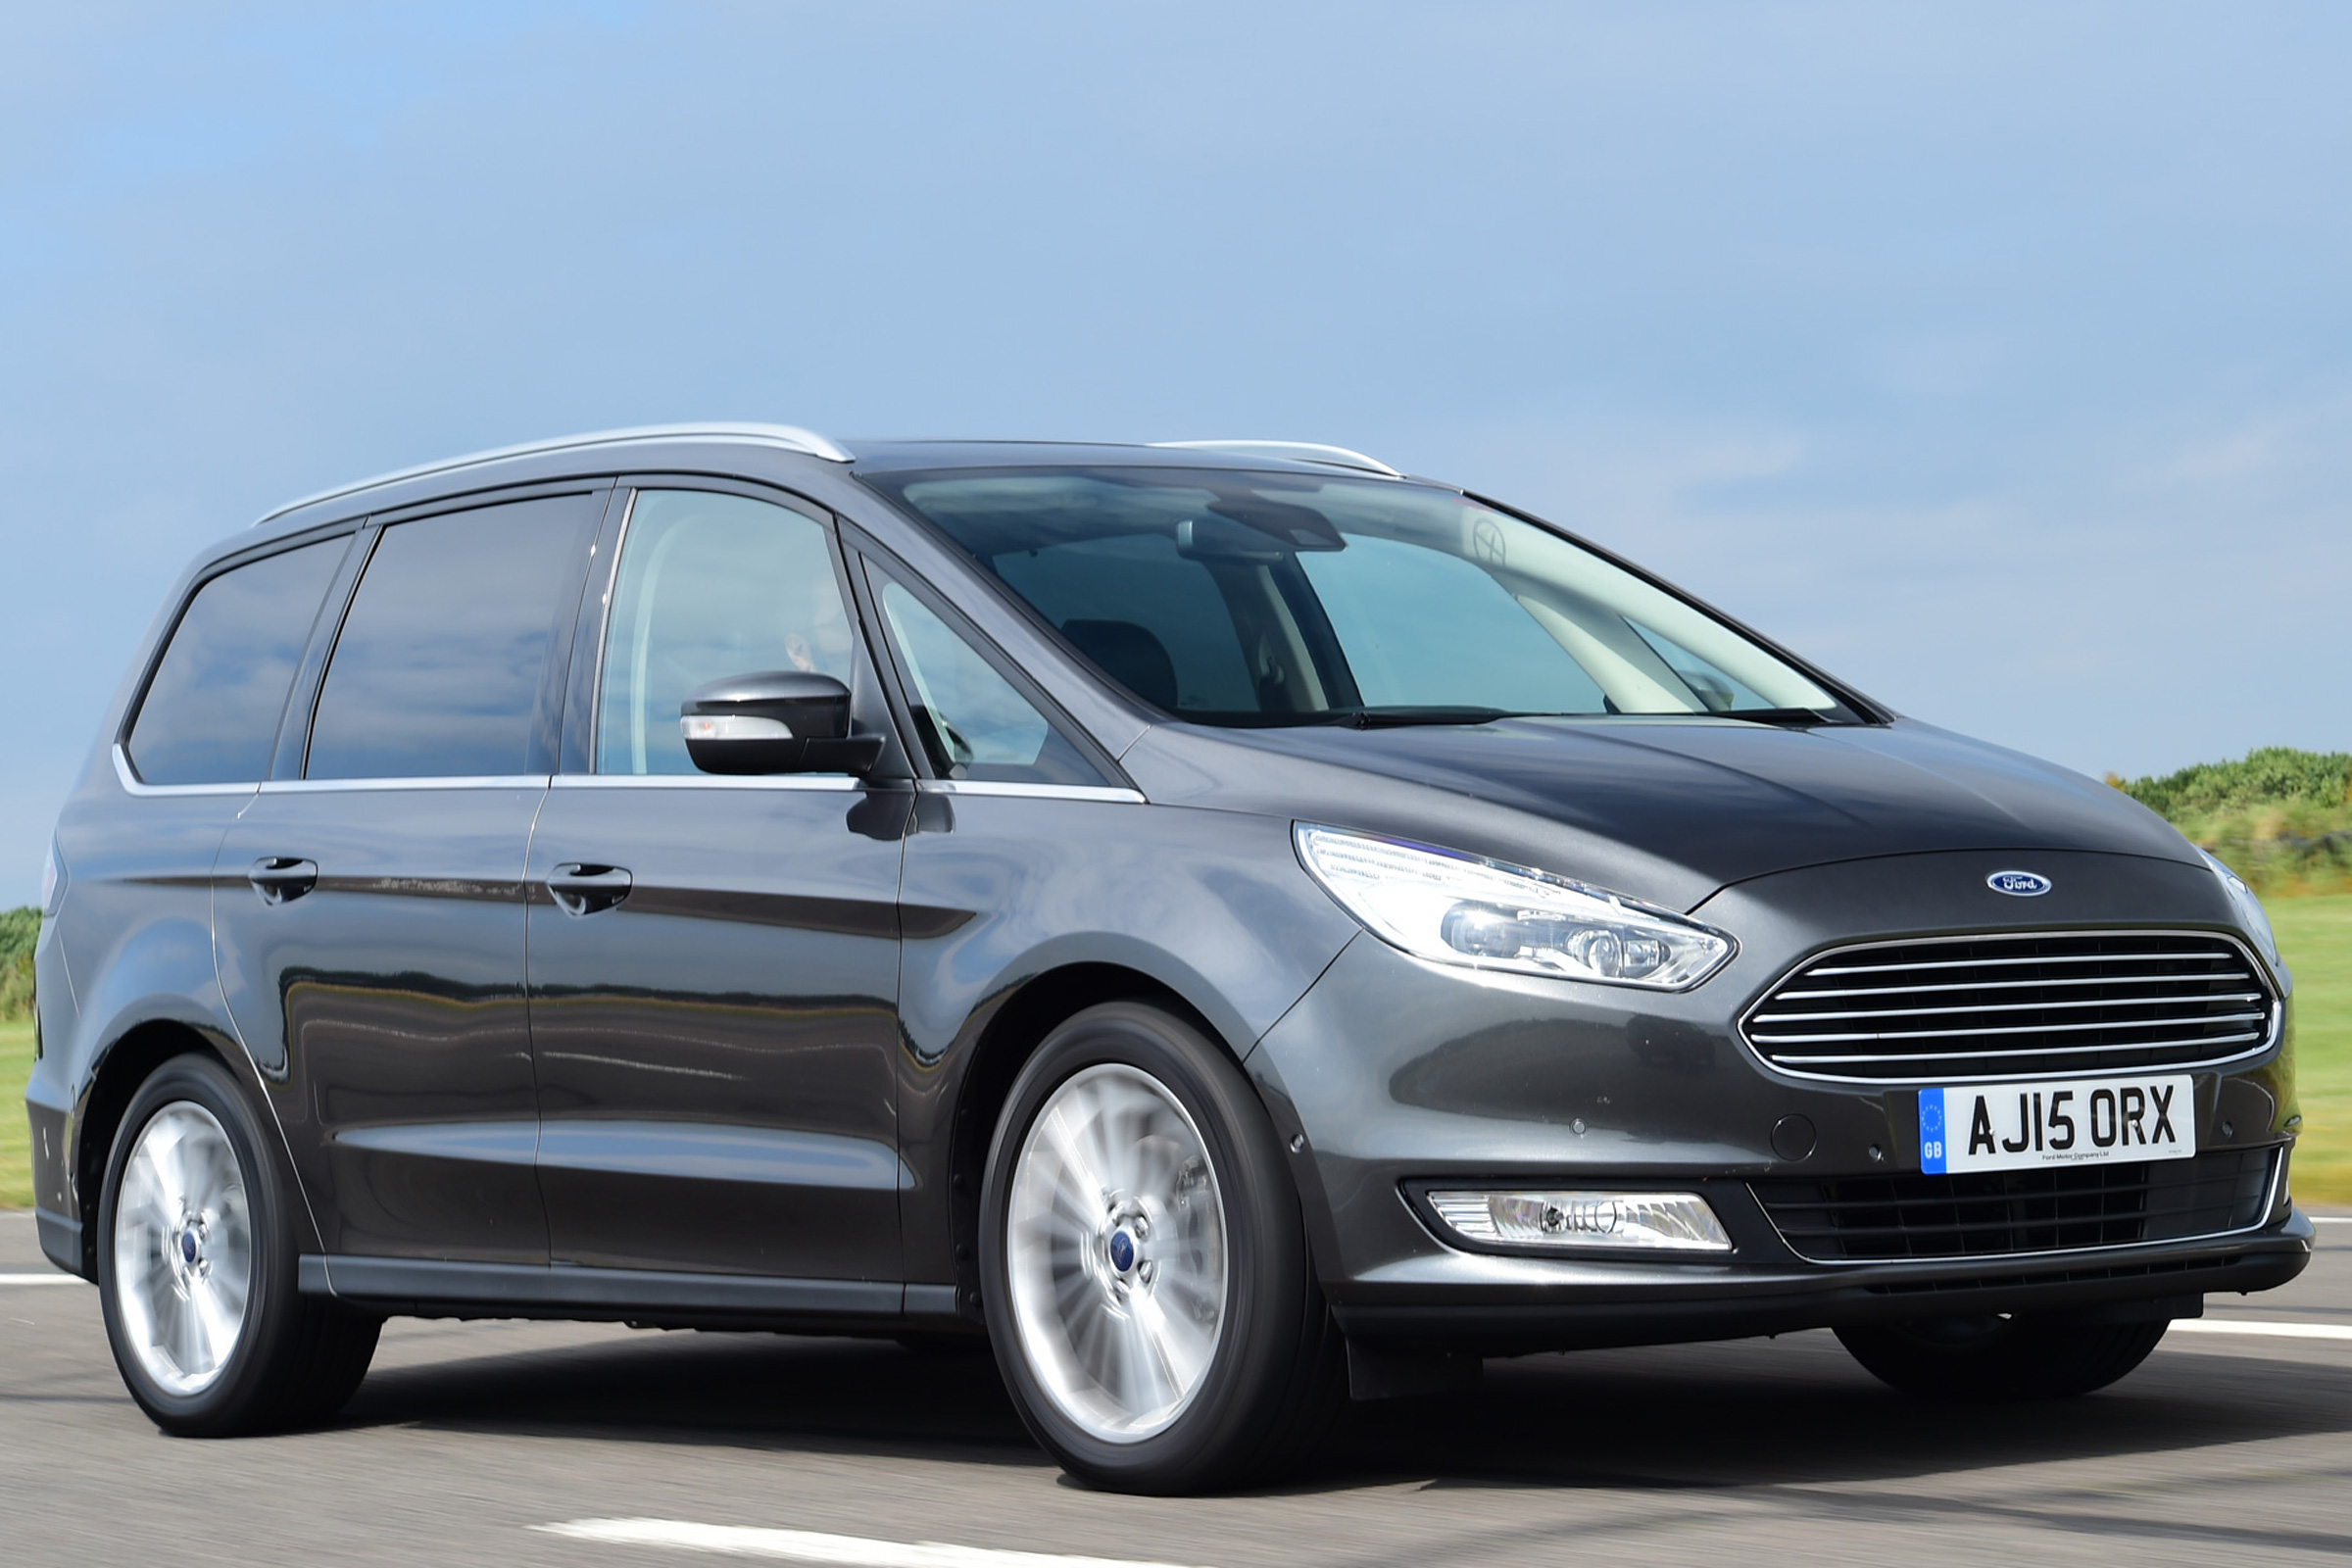 https://mediacloud.carbuyer.co.uk/image/private/s--69oO5NsY--/v1579624767/carbuyer/ford-galaxy-titanium-2_0.jpg